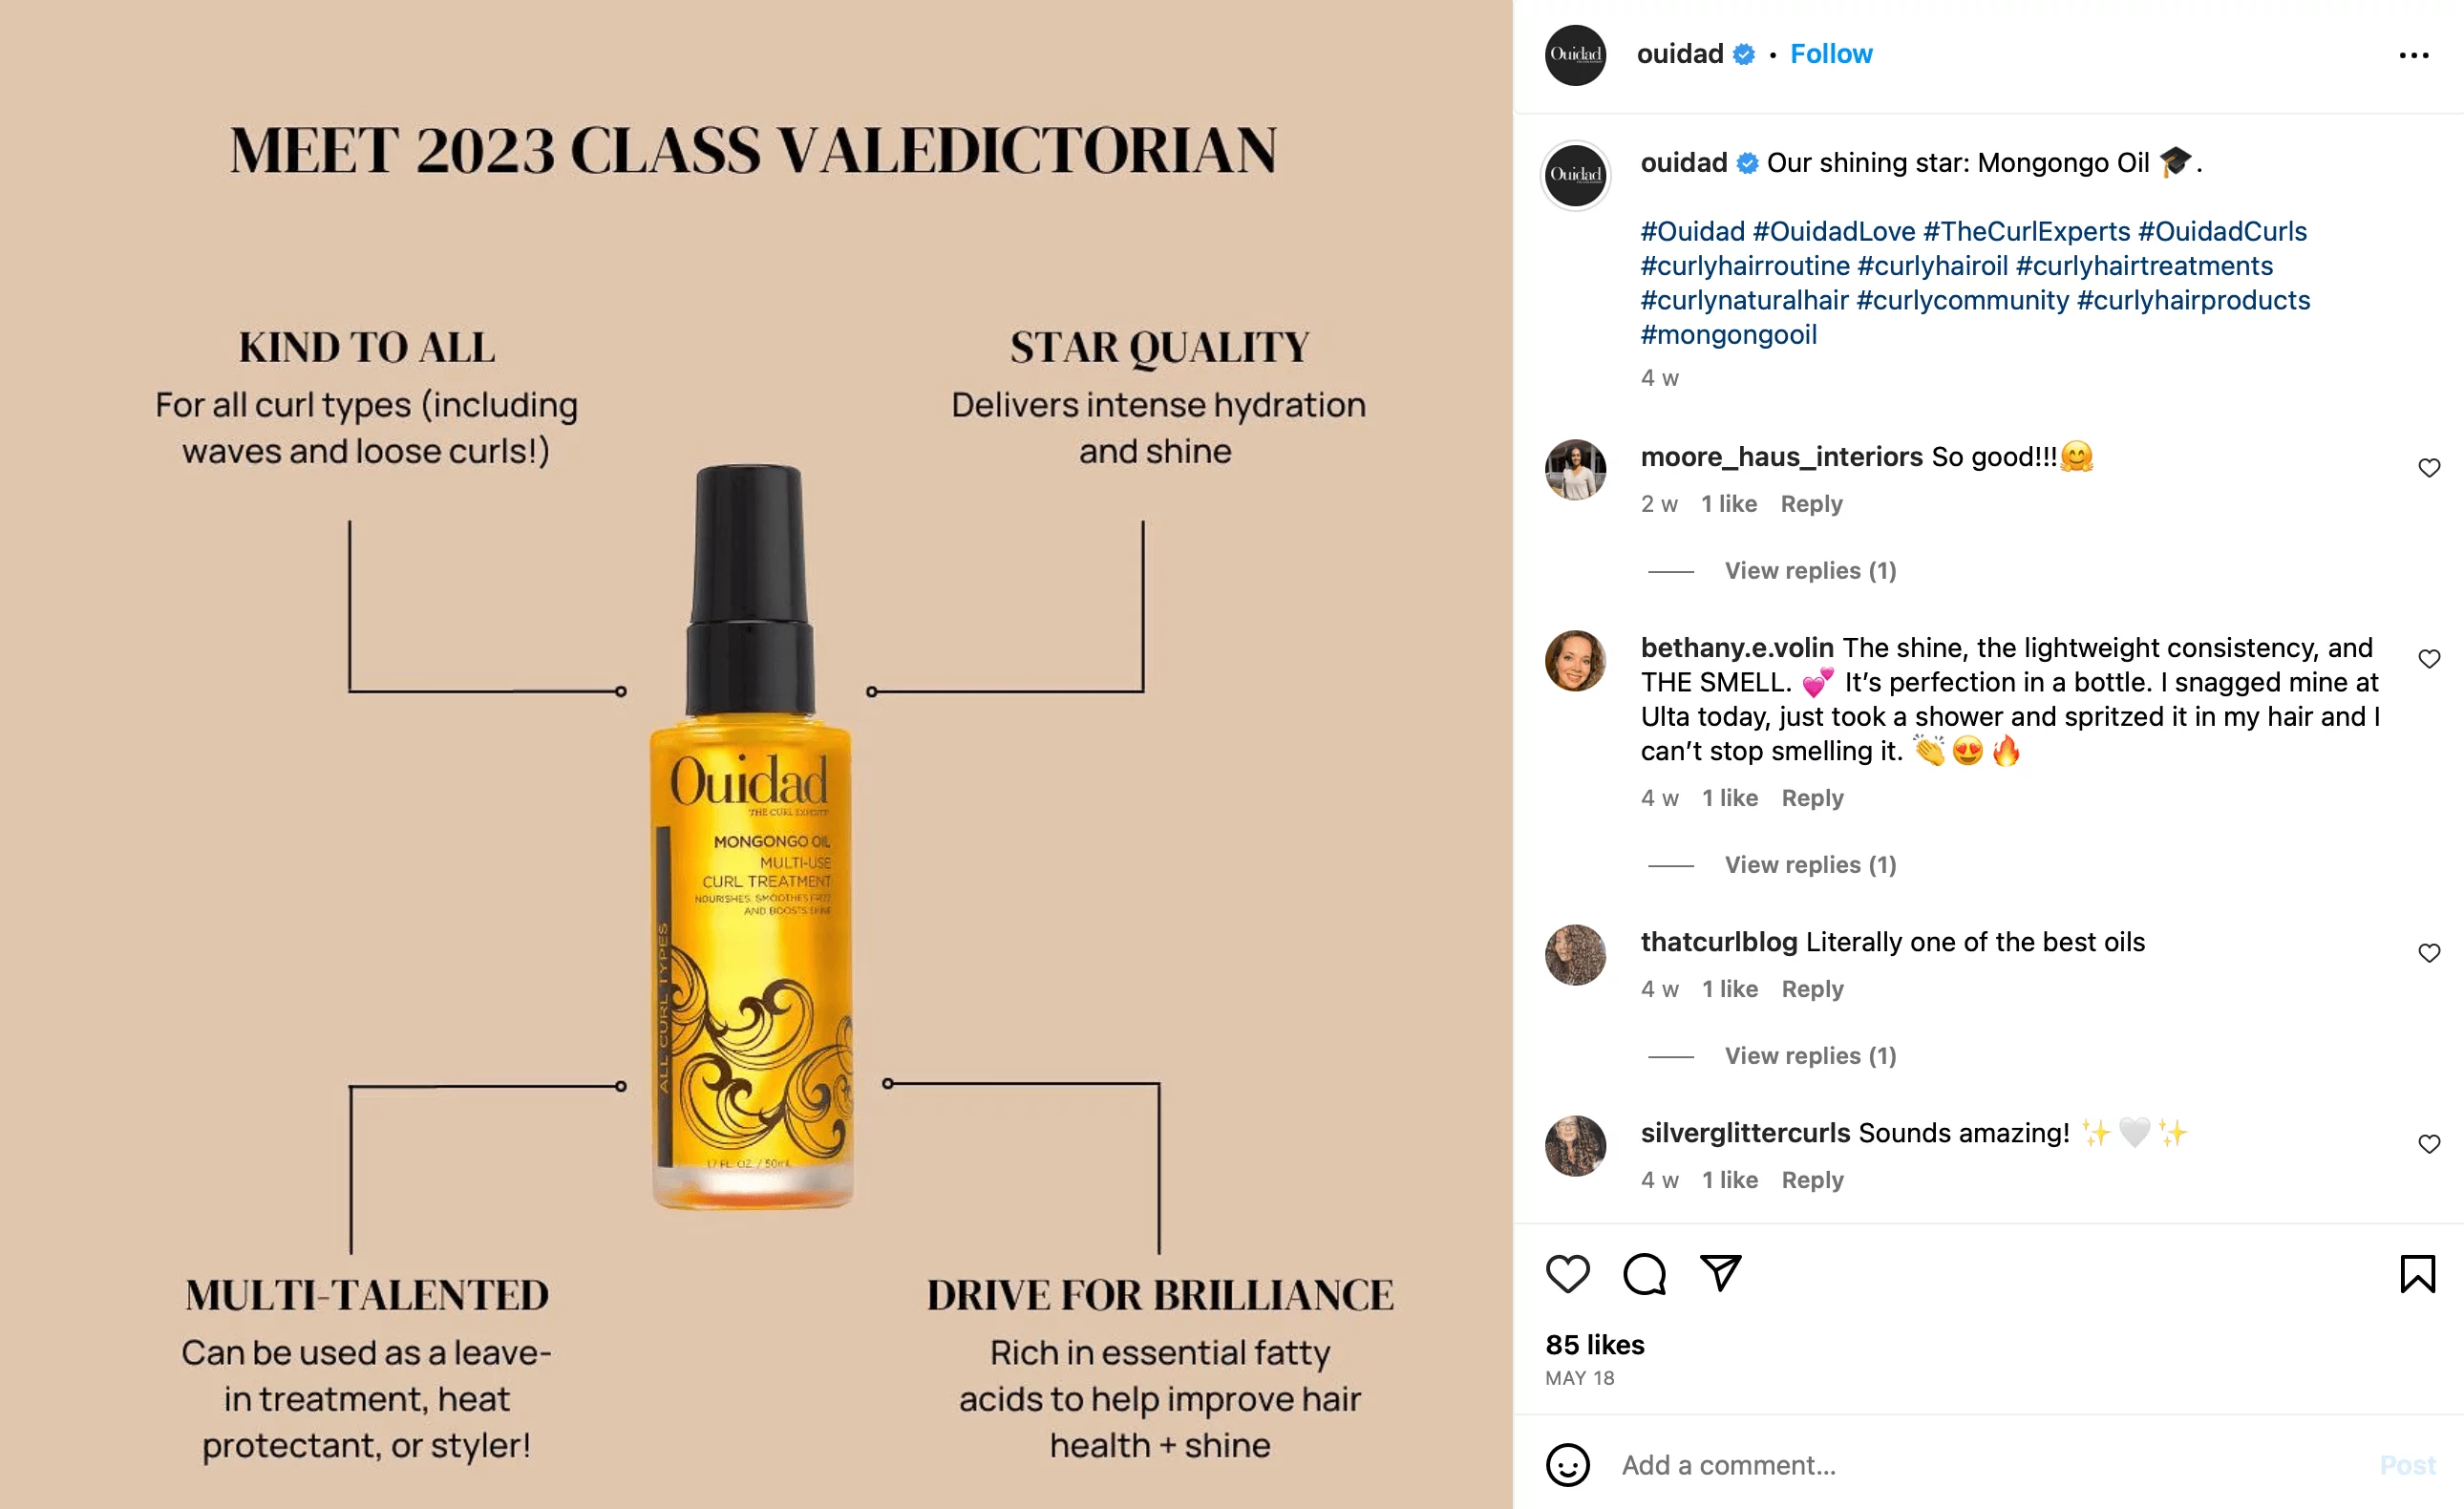 @ouidad's Mongongo Oil product presented as 2023 class valedictorian with relatable product characteristics on Instagram